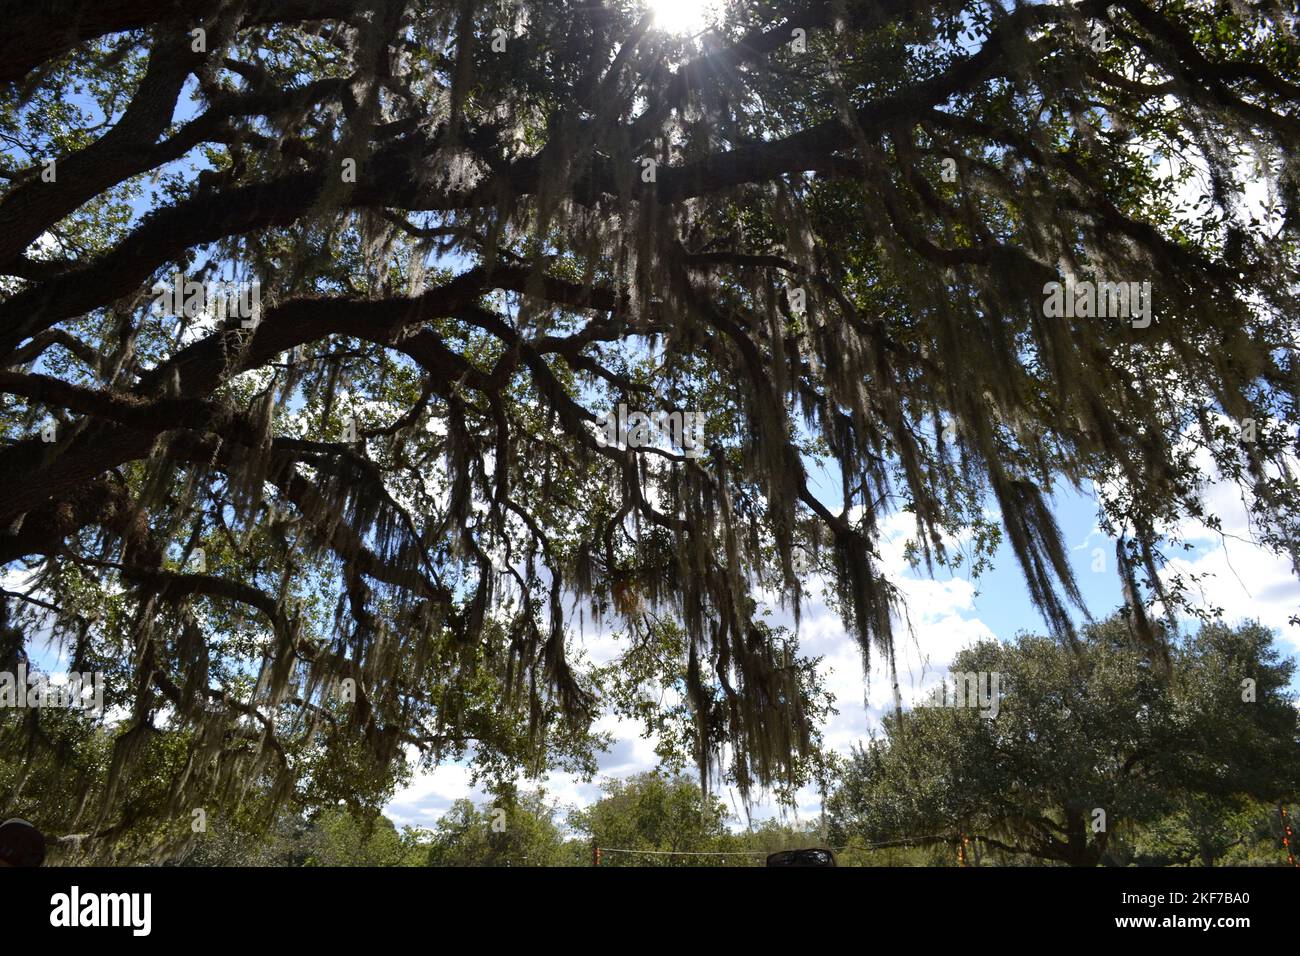 Spreading branches of a tree full of Spanish moss at the plantation somewhere in South Texas, West Columbia Stock Photo